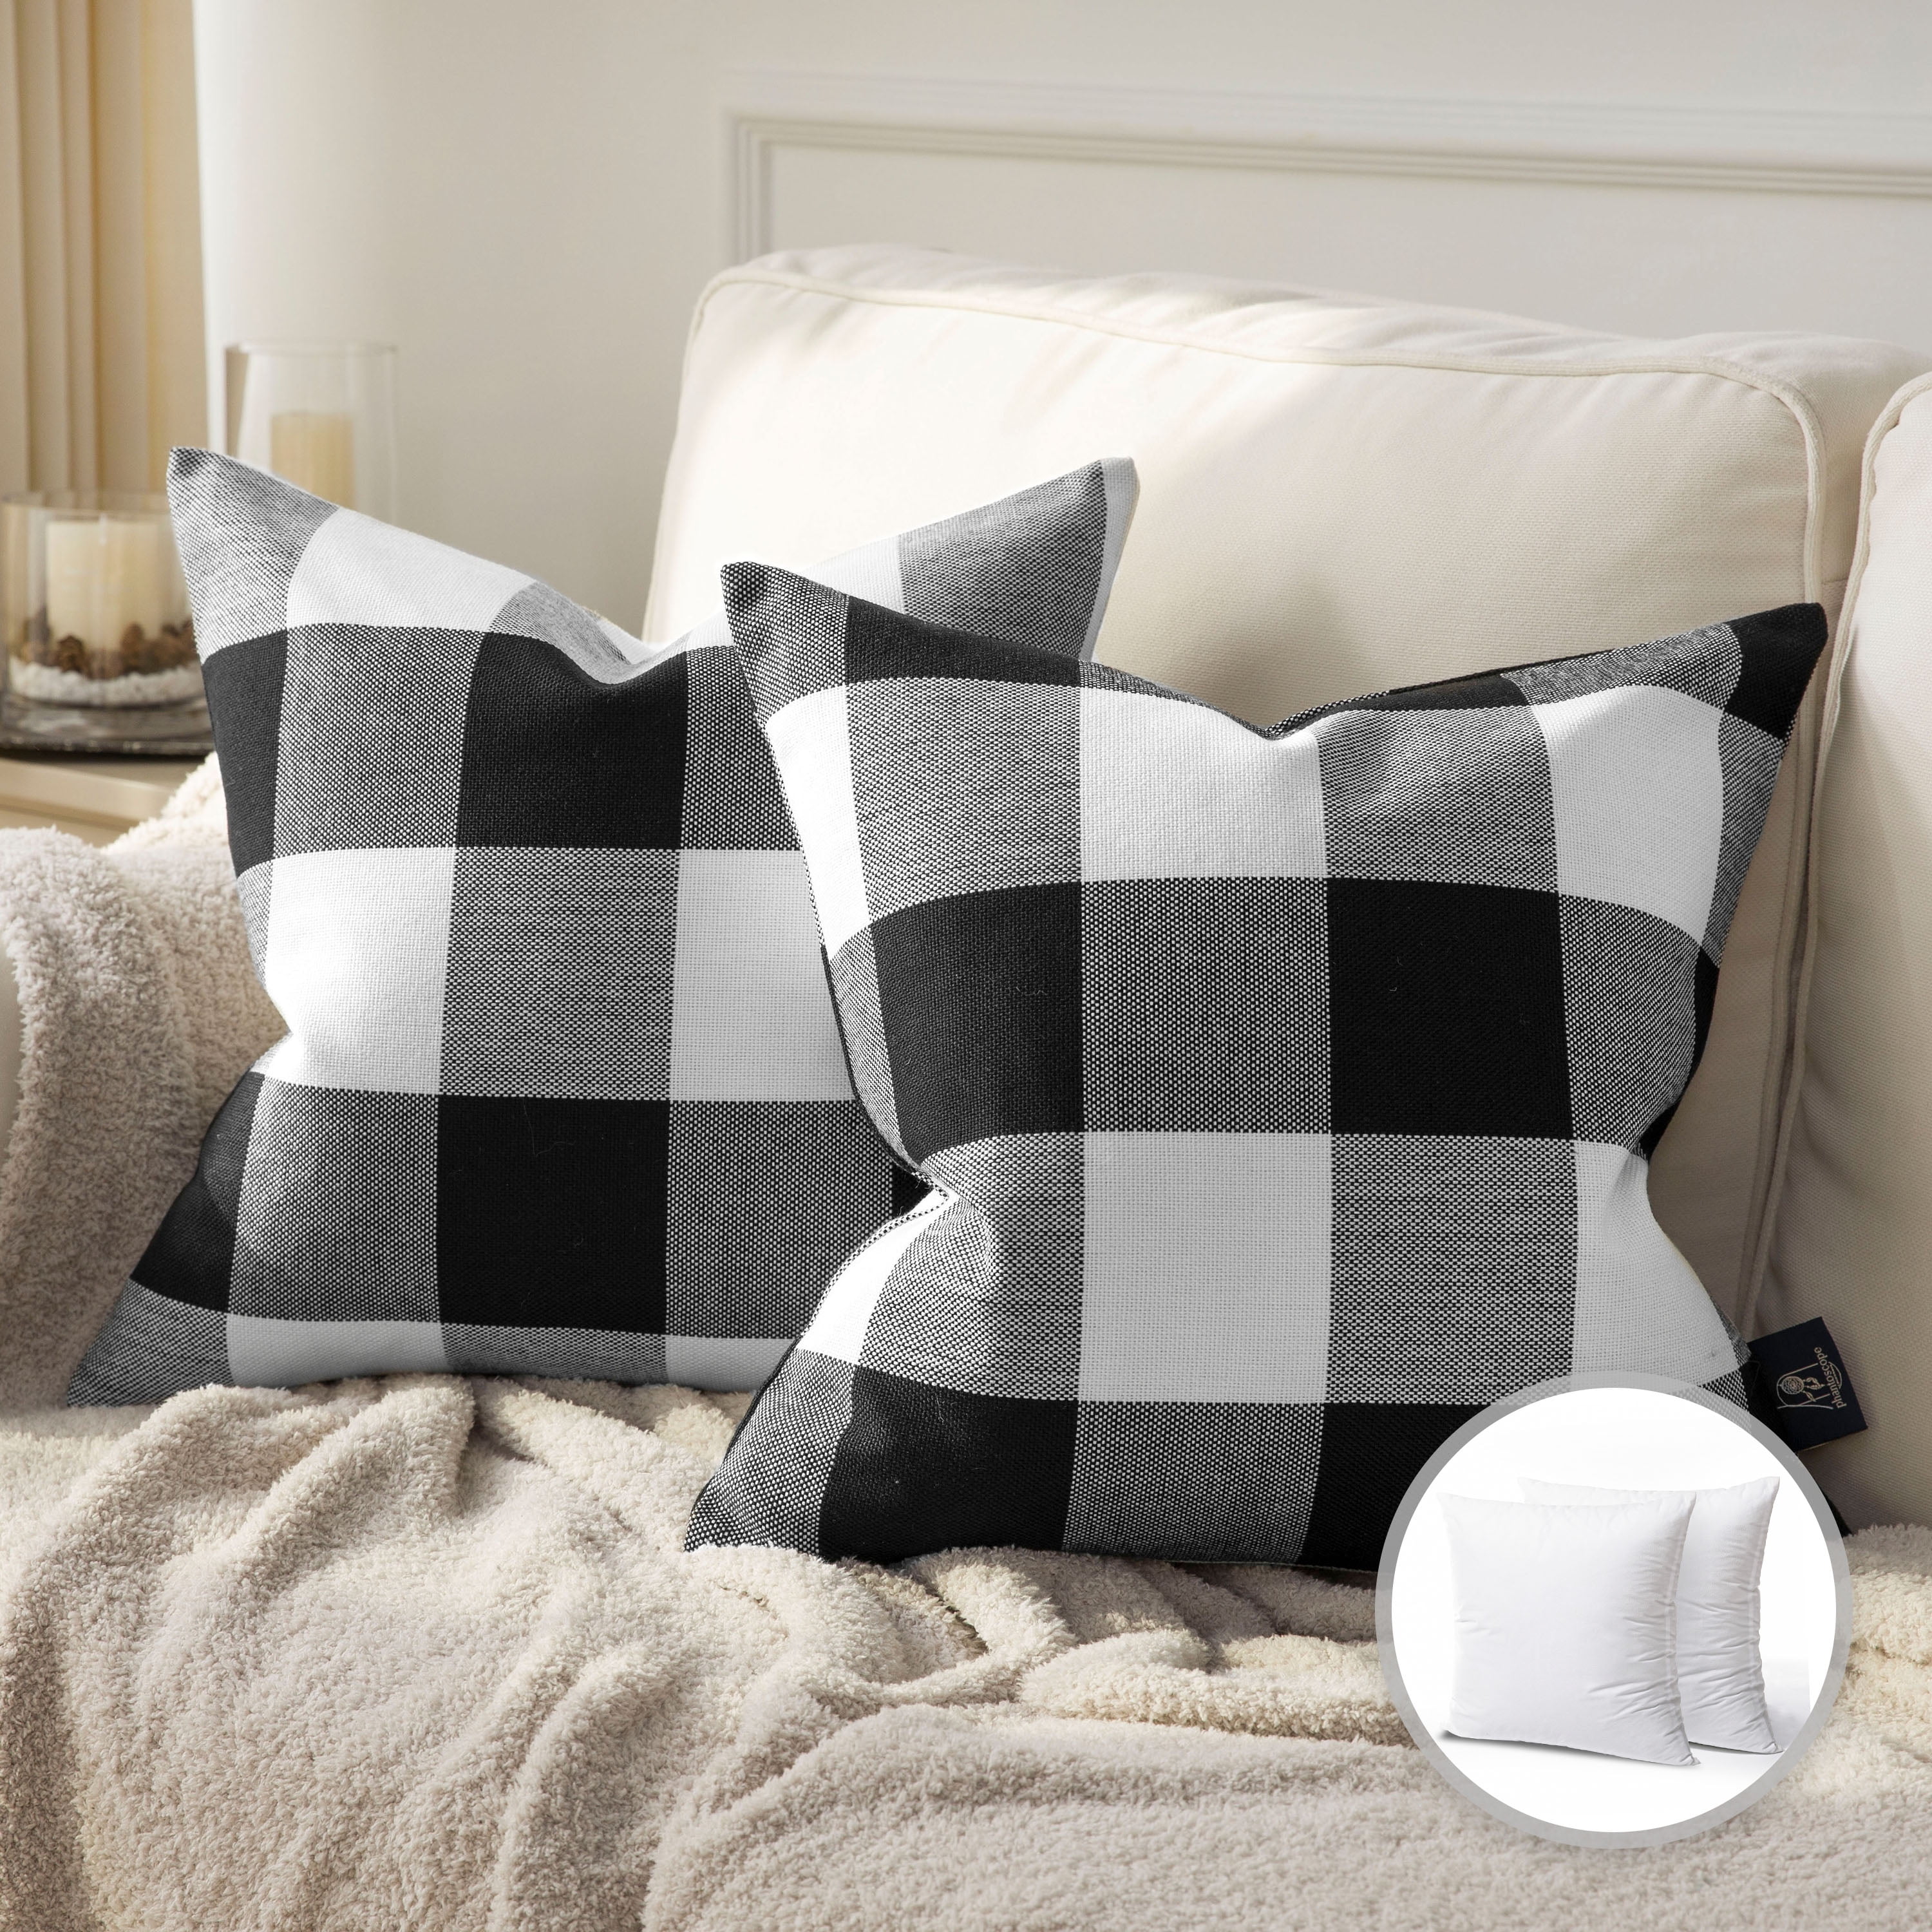 Phantoscope Classic Woven Textured Thick Solid Color Checker Plaid Series Outdoor Decorative Throw Pillow for Patio, 18 inch x 18 inch, Black, 2 Pack